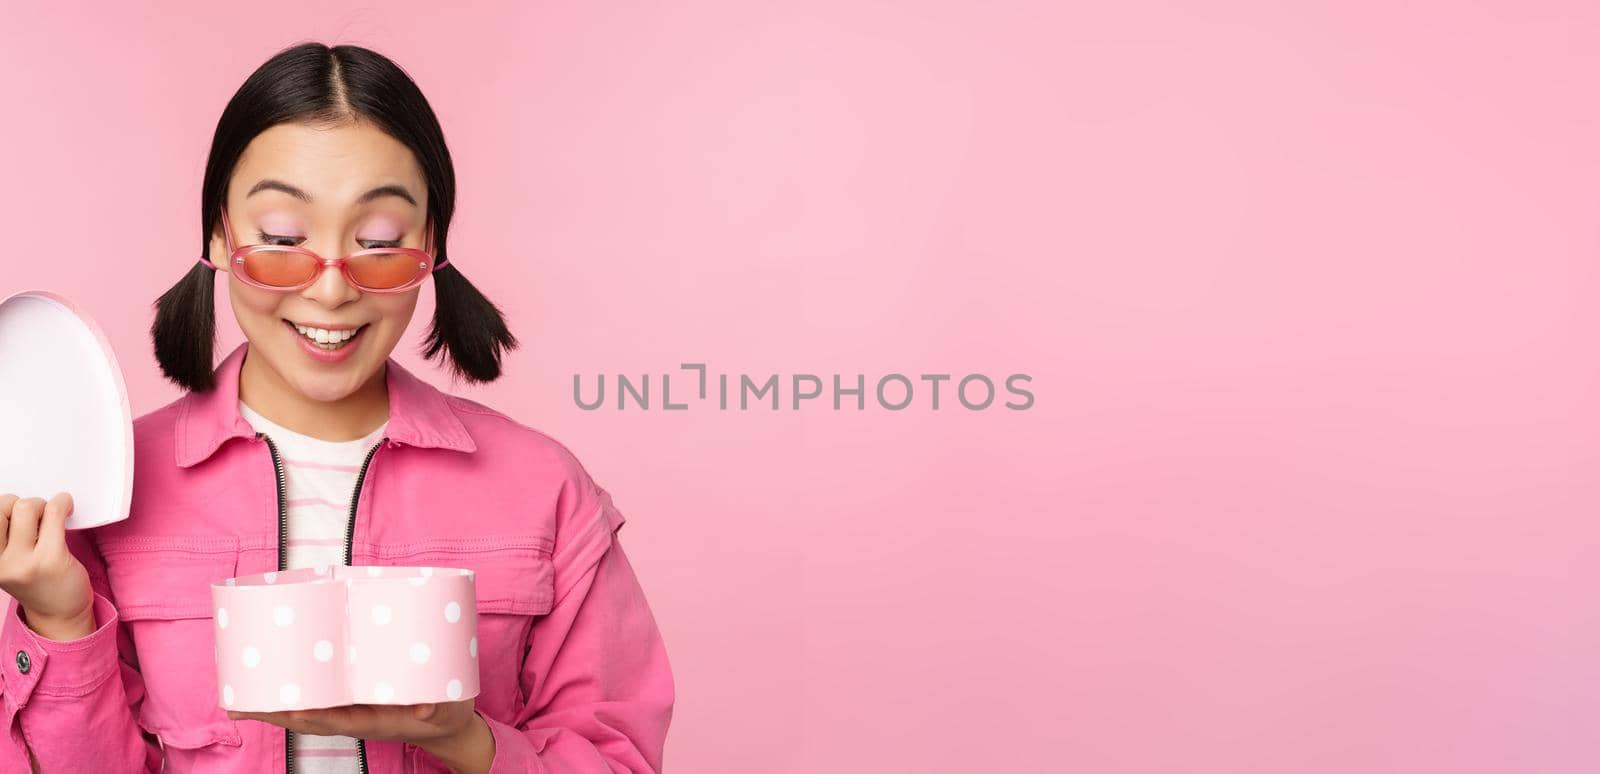 Beautiful asian girl opens up heart shaped gift box, looking happy, standing in sunglasses, smiling surprised at camera, pink background.